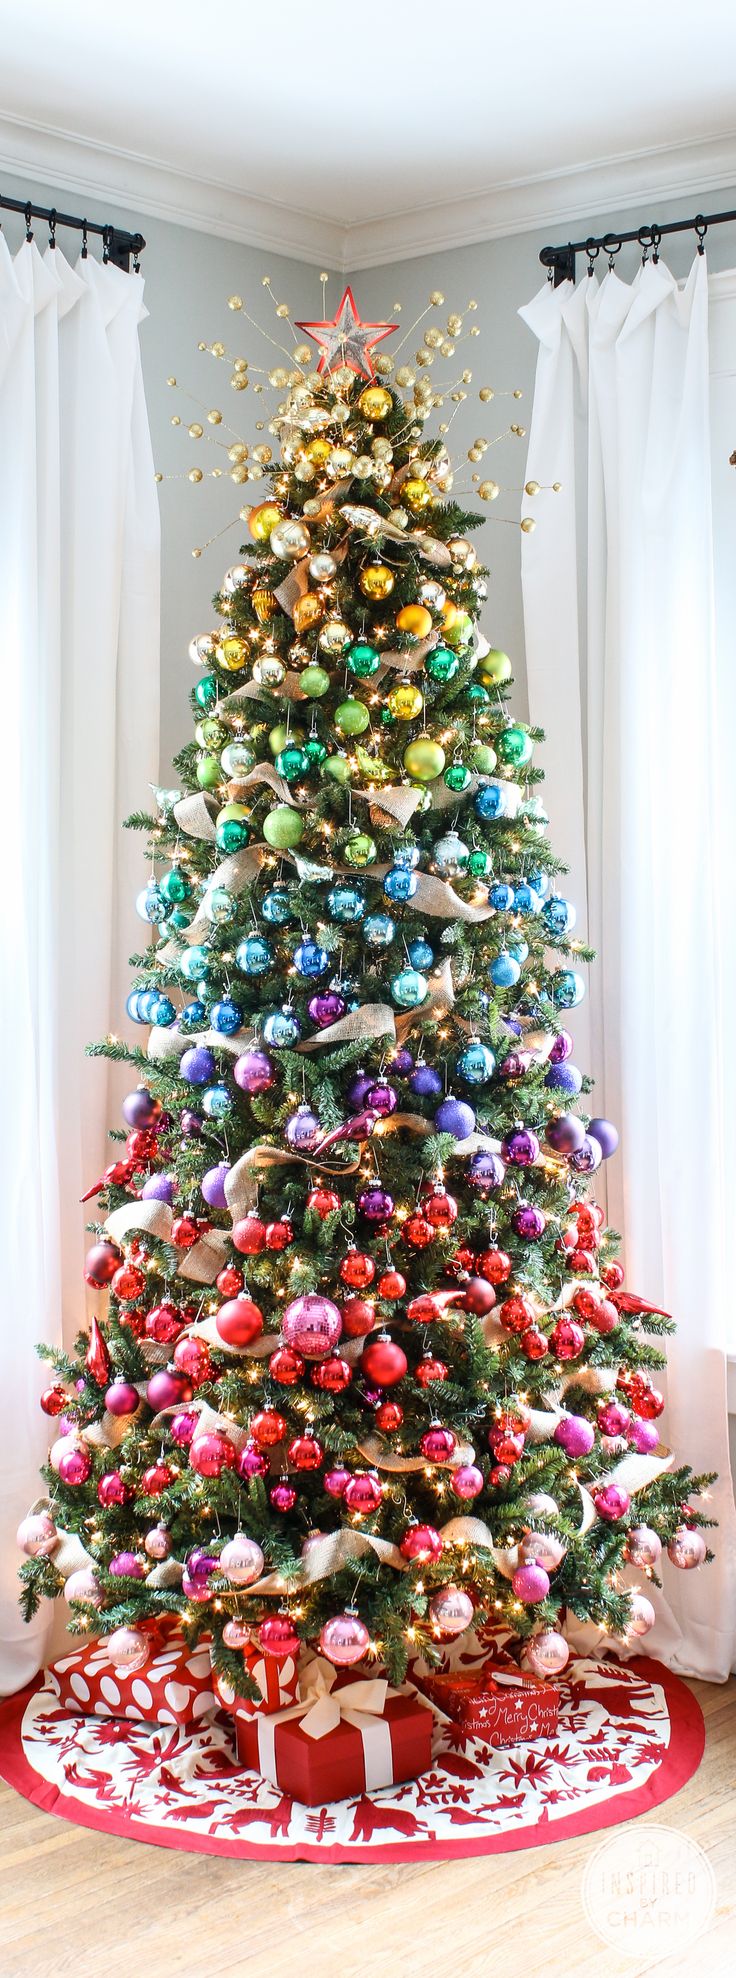 the-most-colorful-and-sweet-christmas-trees-and-decorations-you-have-ever-seen-homesthetics-2